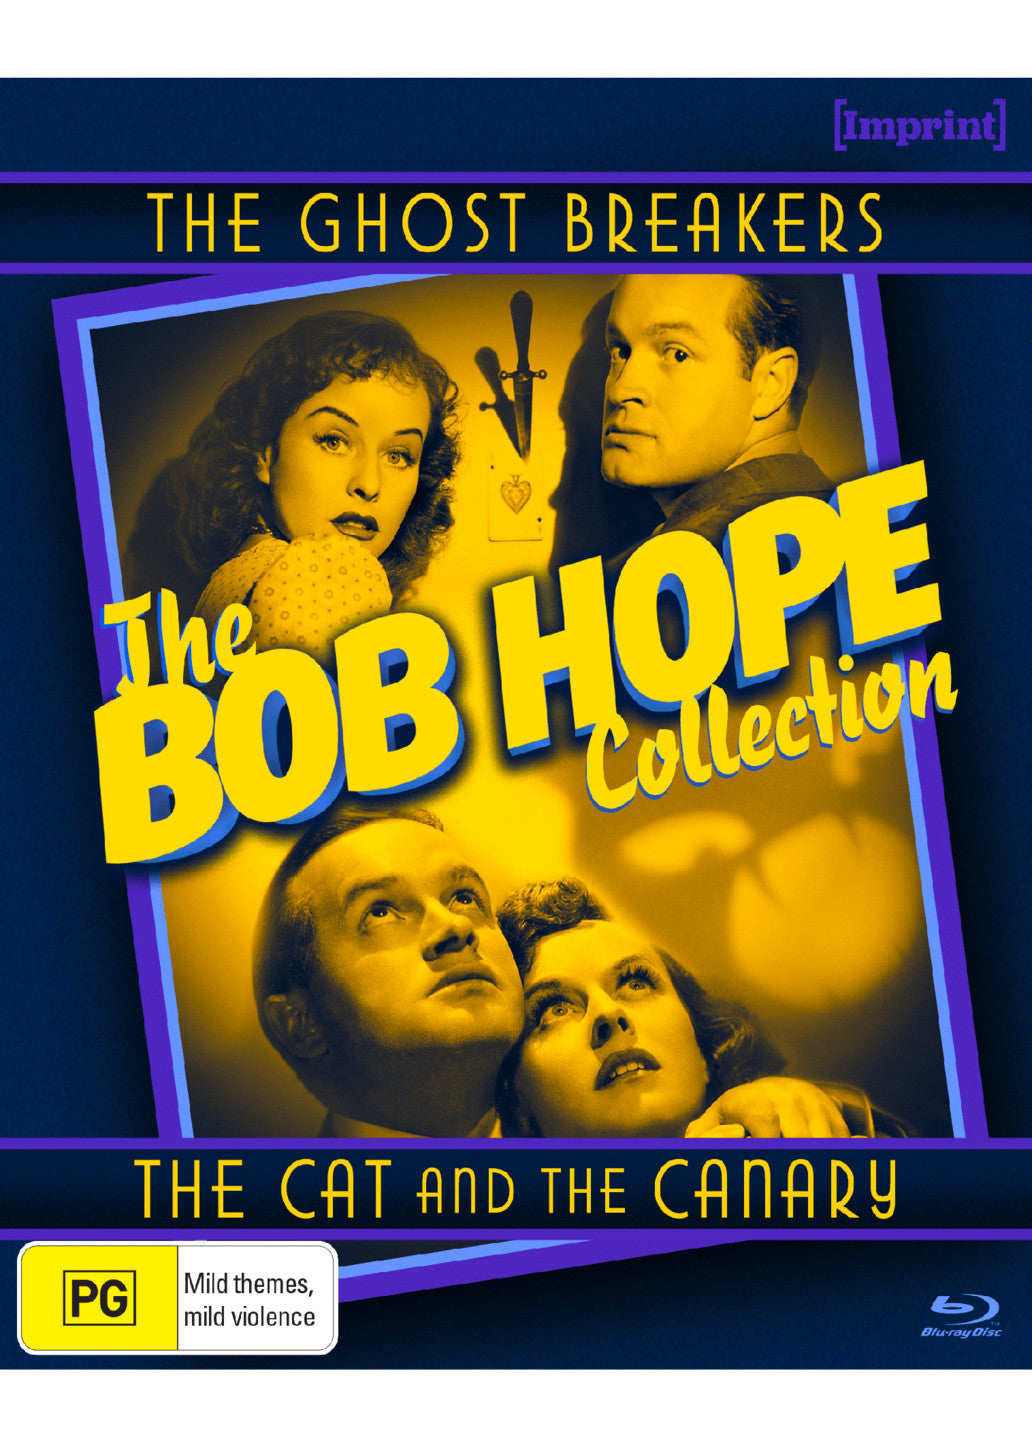 THE BOB HOPE COLLECTION: THE CAT & THE CANARY / THE GHOST BREAKERS (IMPRINT COLLECTION # 16 & 17) BLU RAY